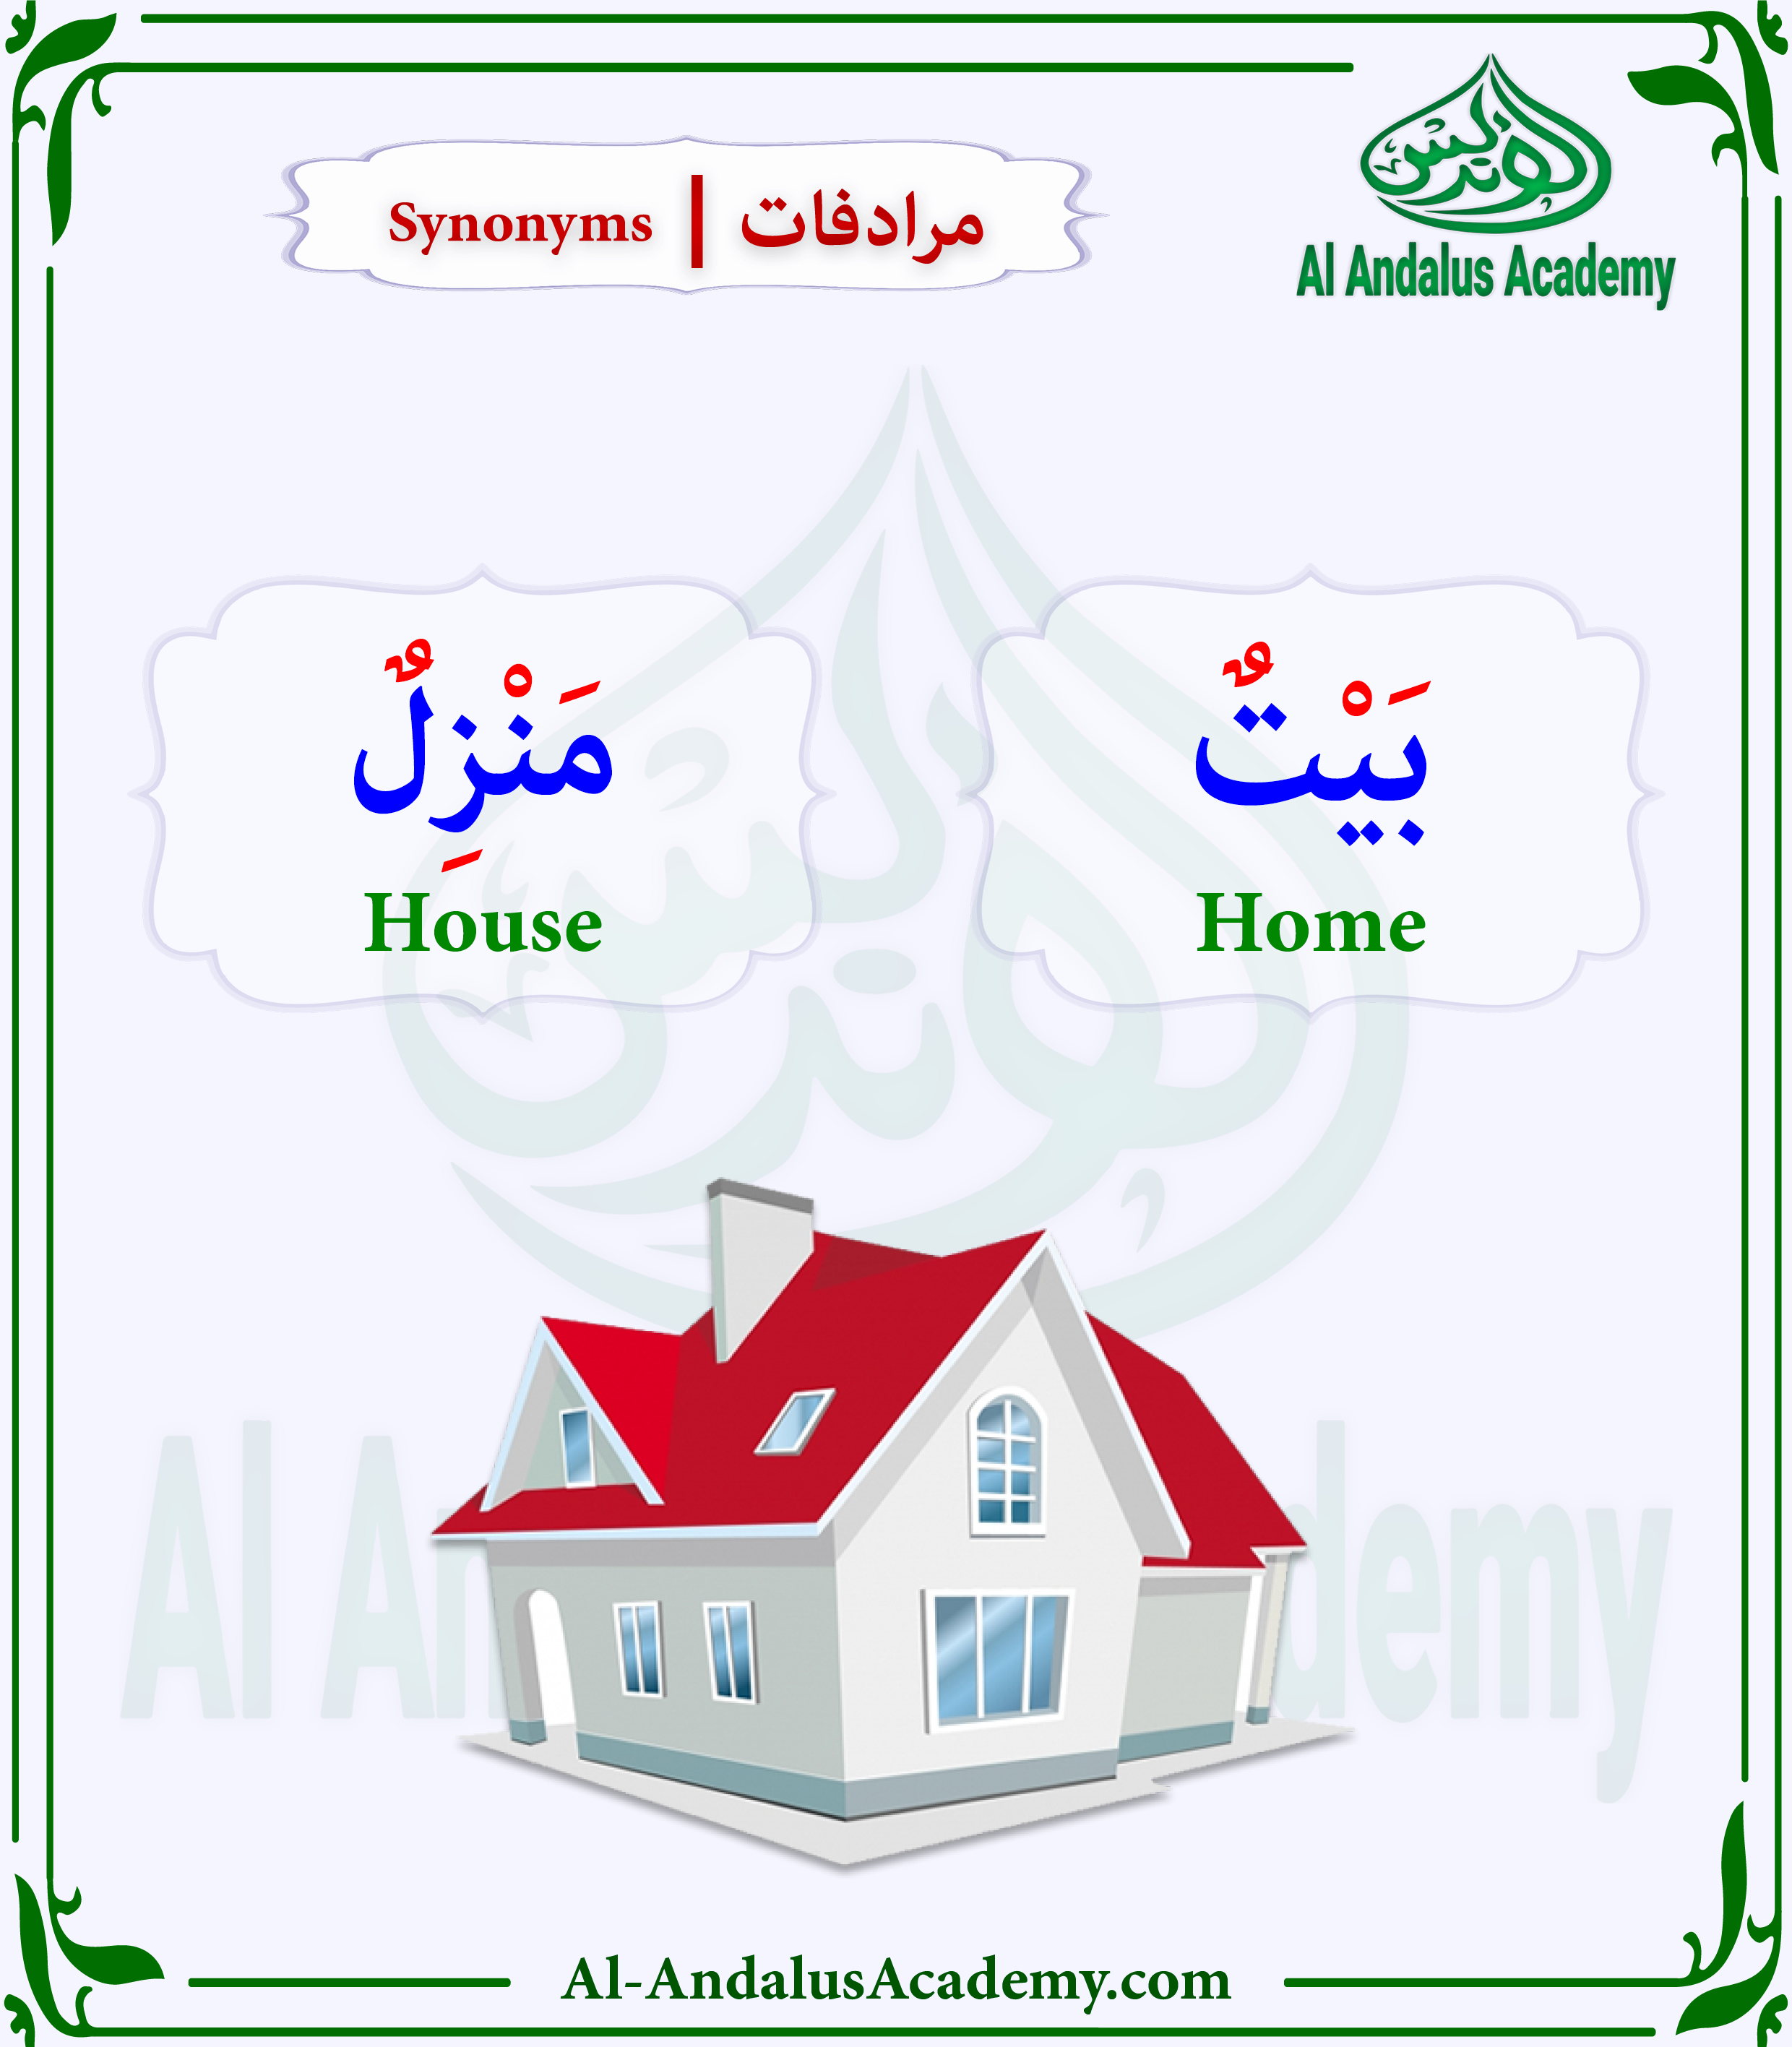 Learn Arabic from home